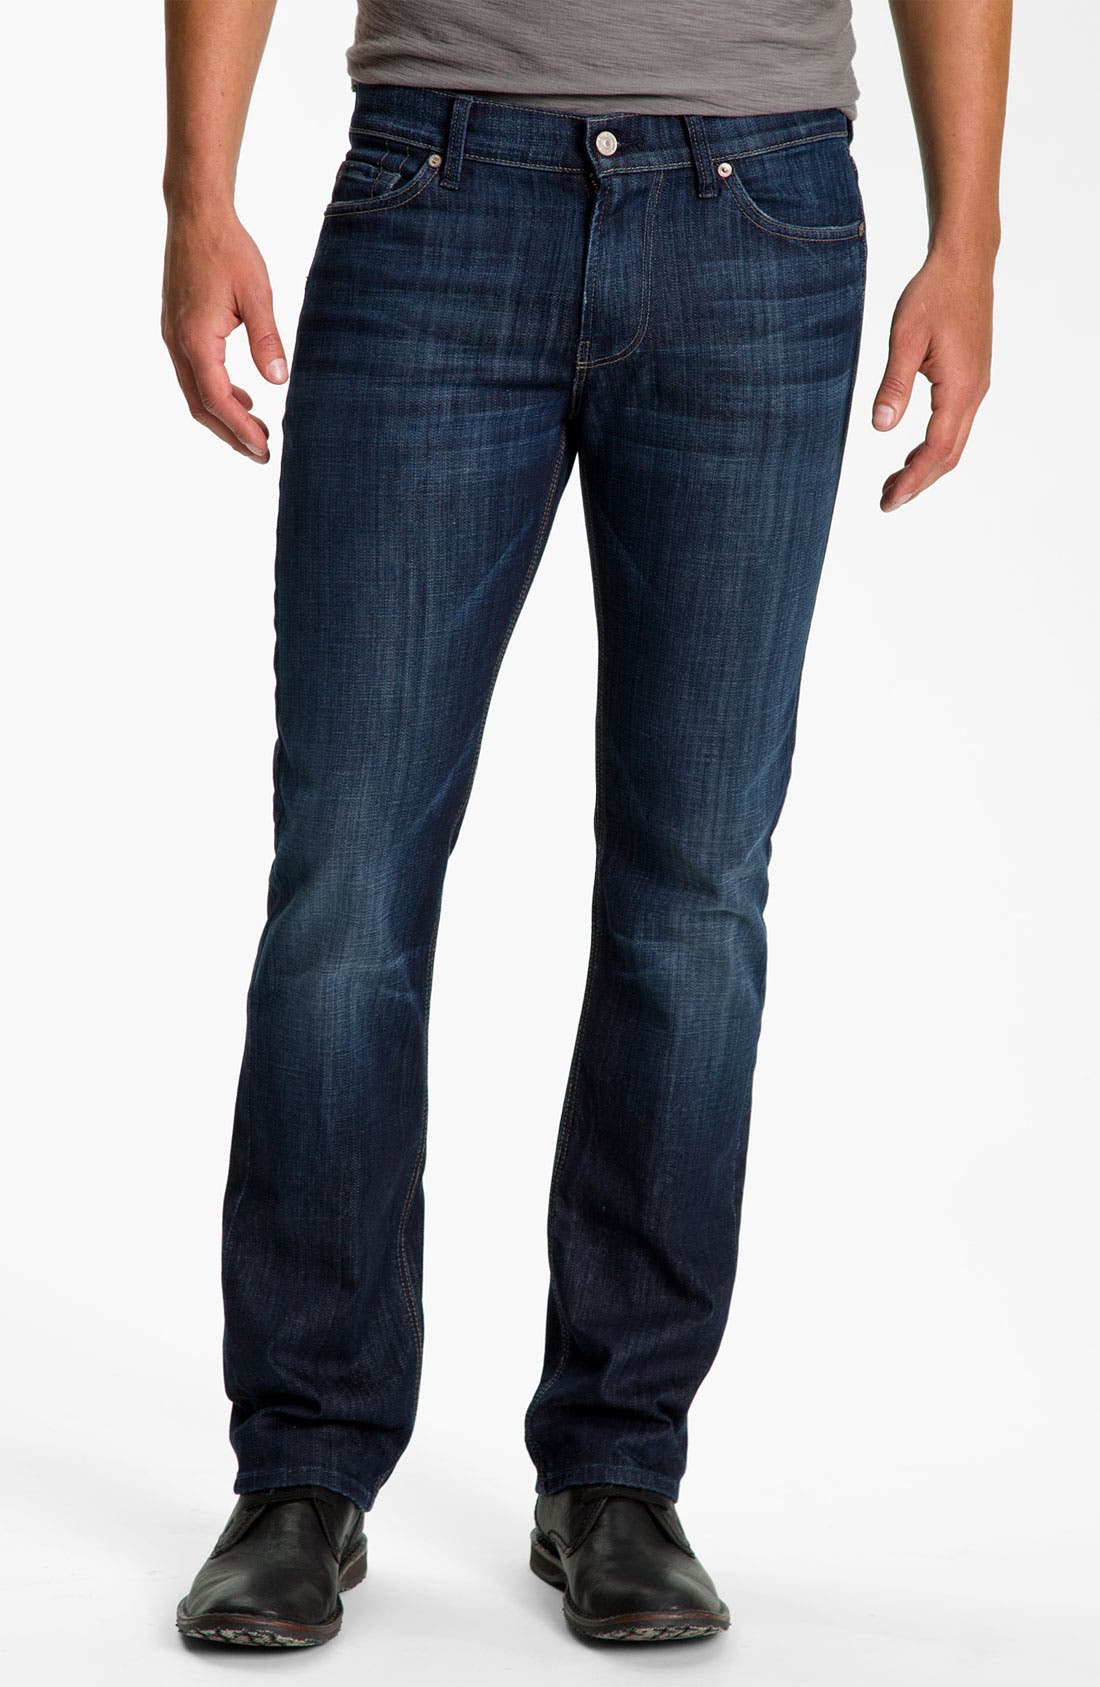 7 for all mankind slimmy mens